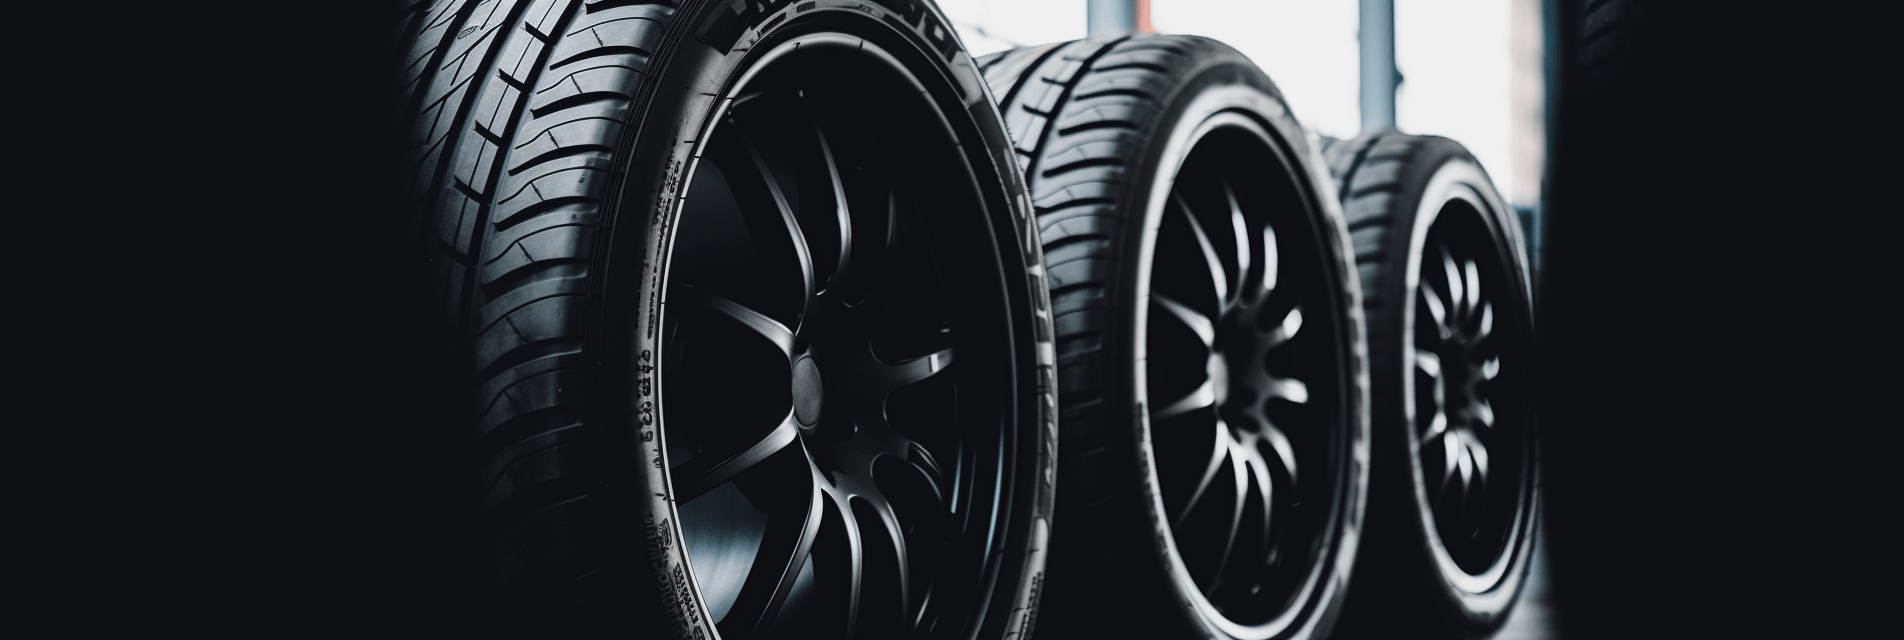 Create an image featuring a tire dealership with aestheti 6d112313 9c21 4943 9372 94e61720ded5